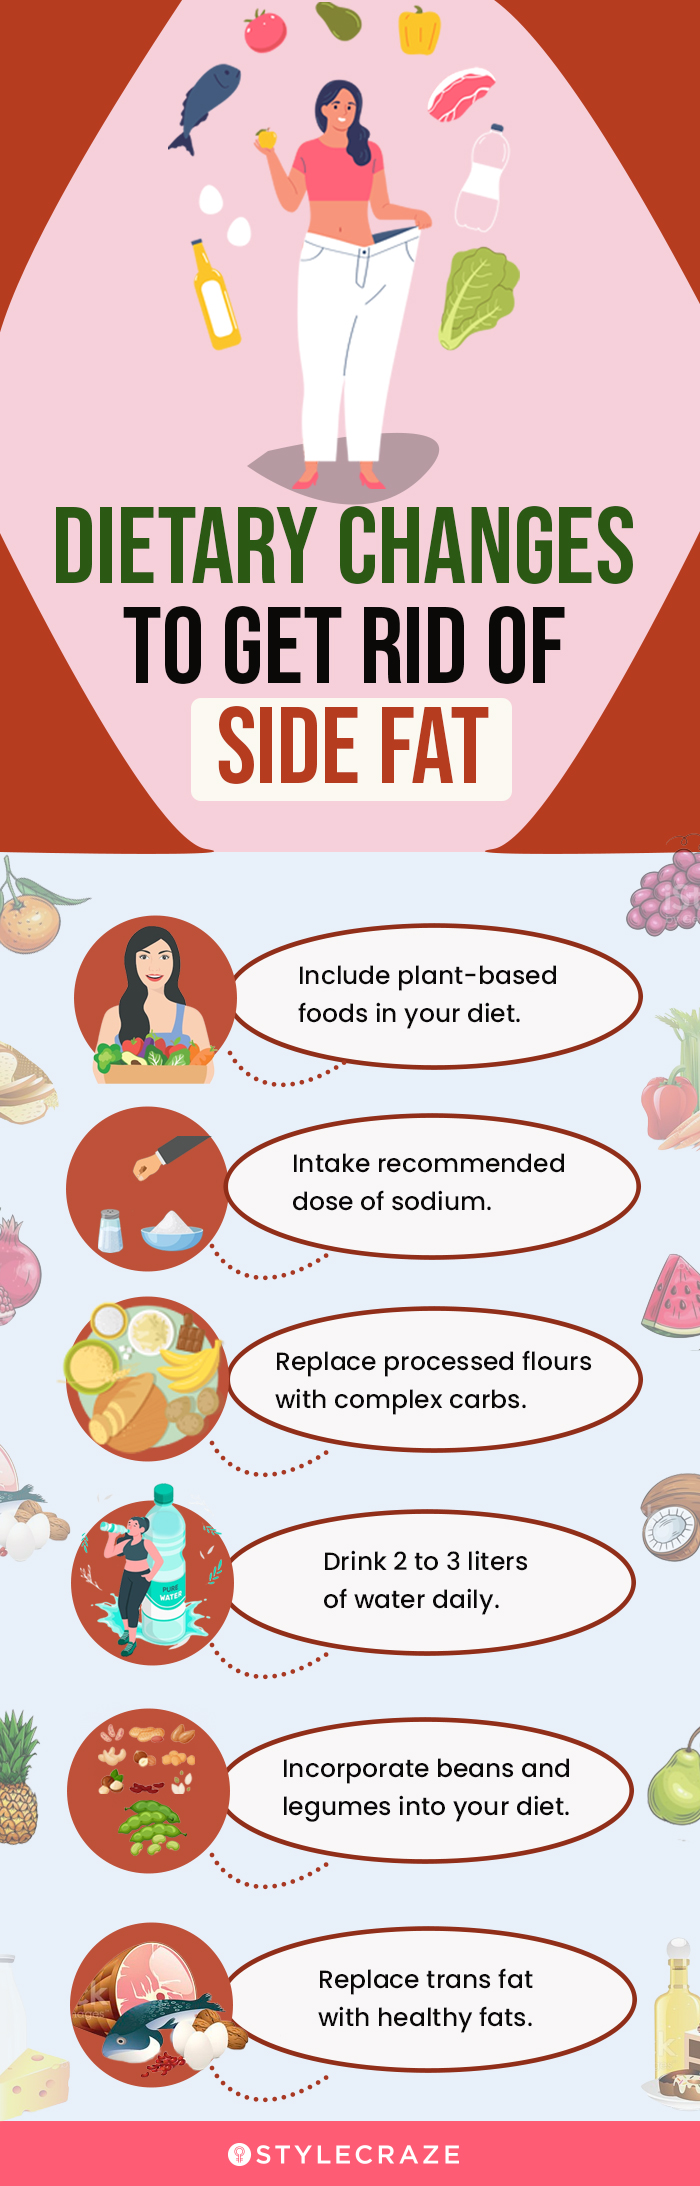 dietary changes to get rid of side fat (infographic)